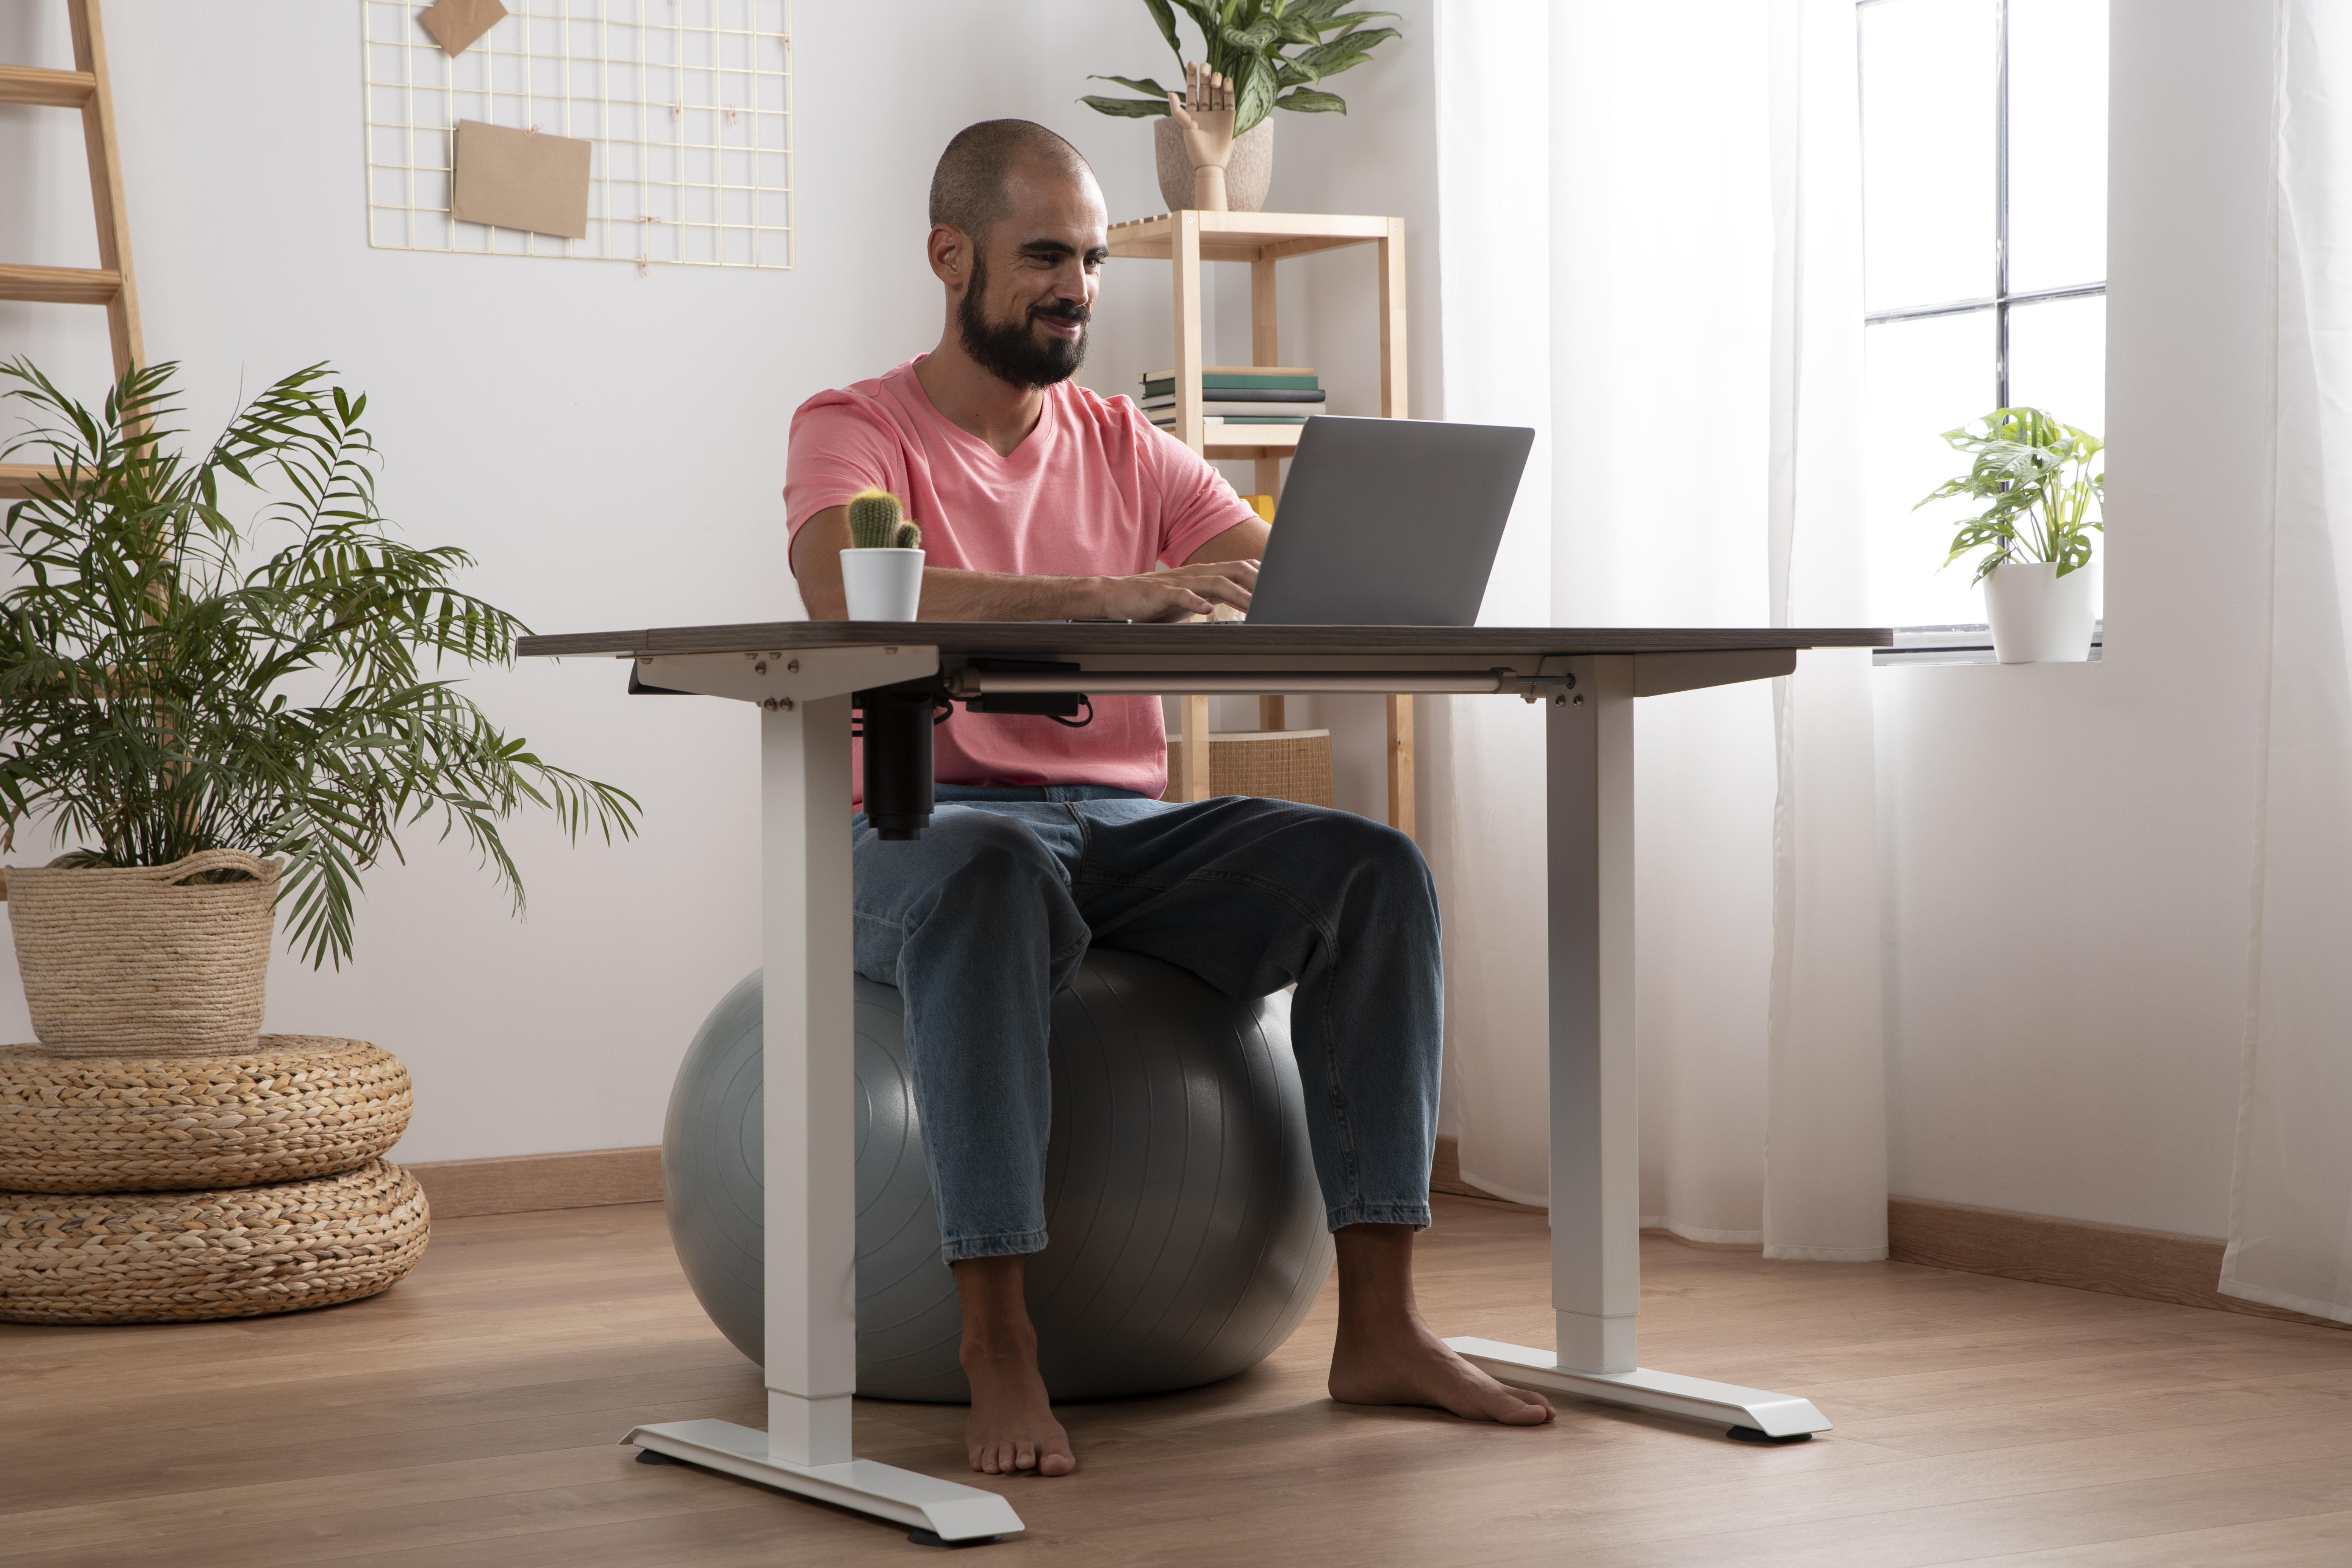 Man sitting on physio ball whilst using a computer at a desk